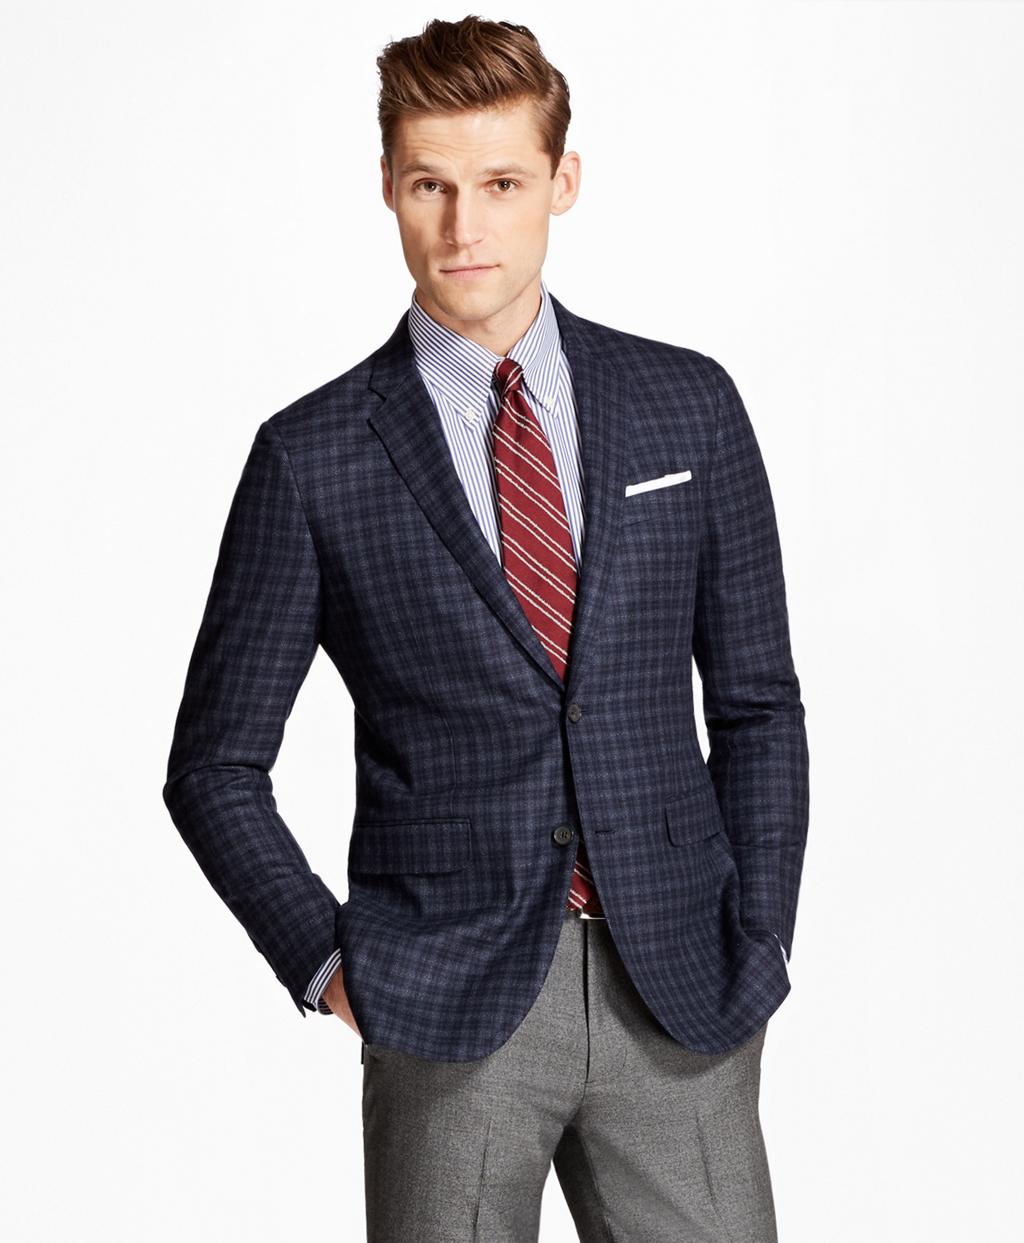 Lyst - Brooks Brothers Milano Fit Check Sport Coat in Blue for Men